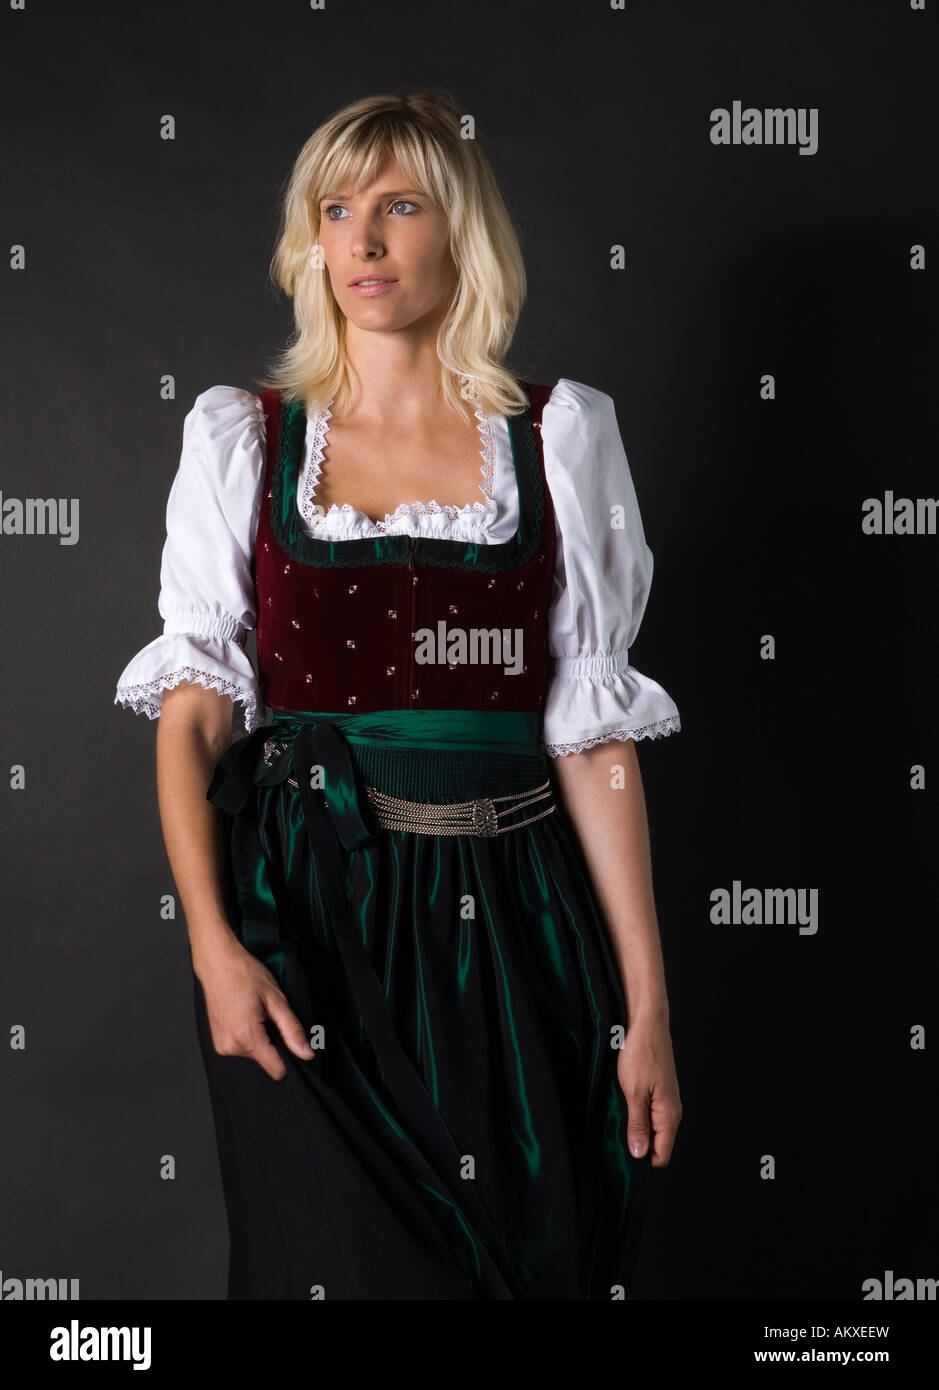 Young blond girl with traditional bavarian dress Stock Photo